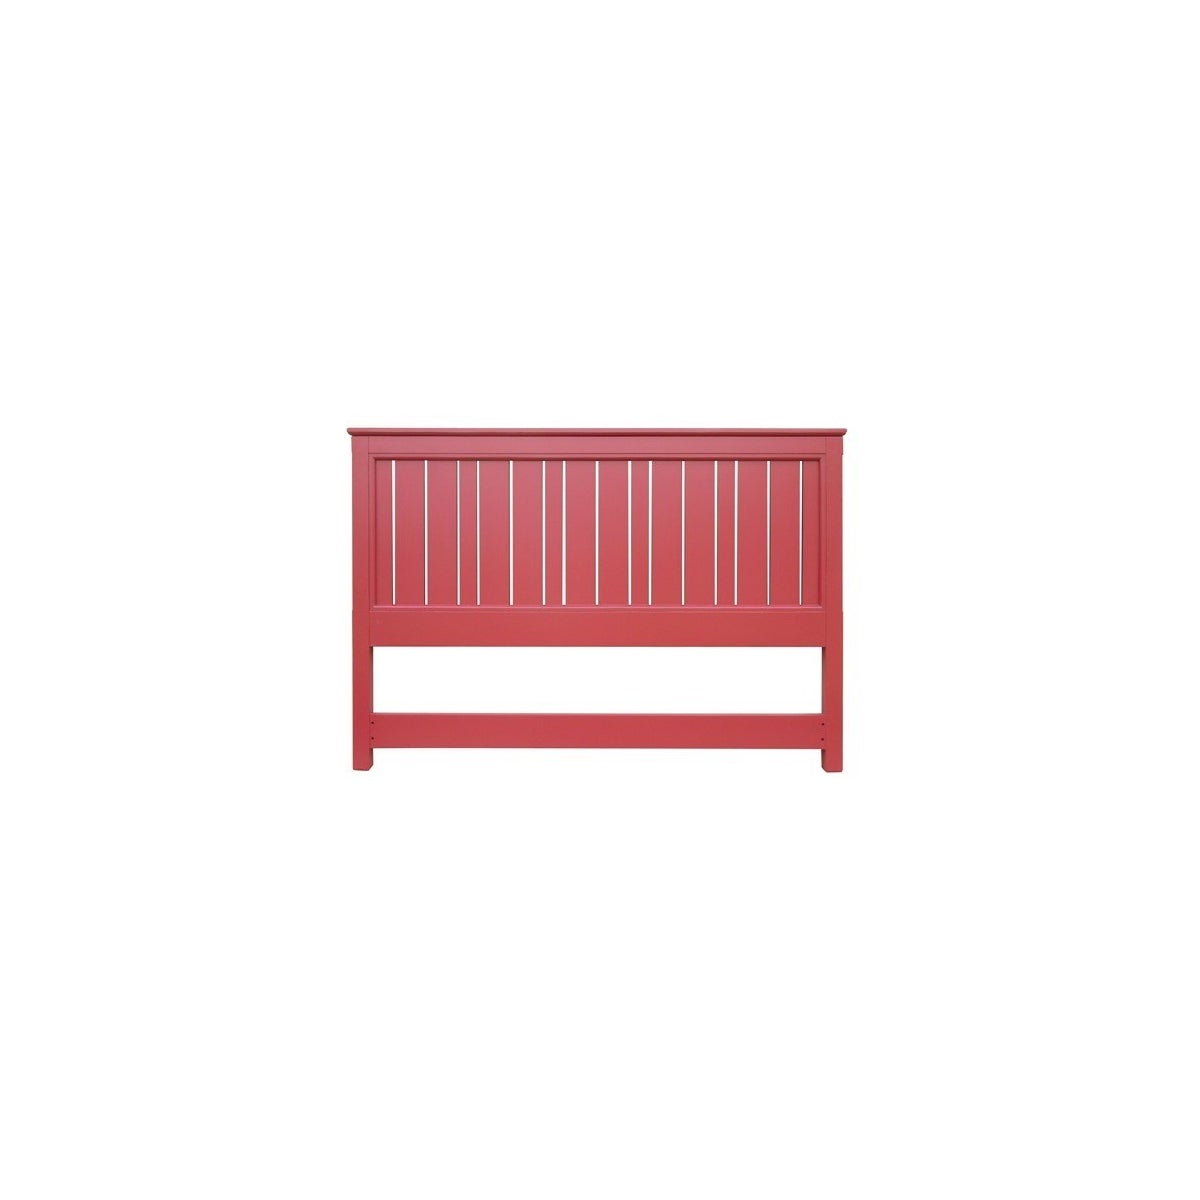 COTTAGE KING HEADBOARD - RED